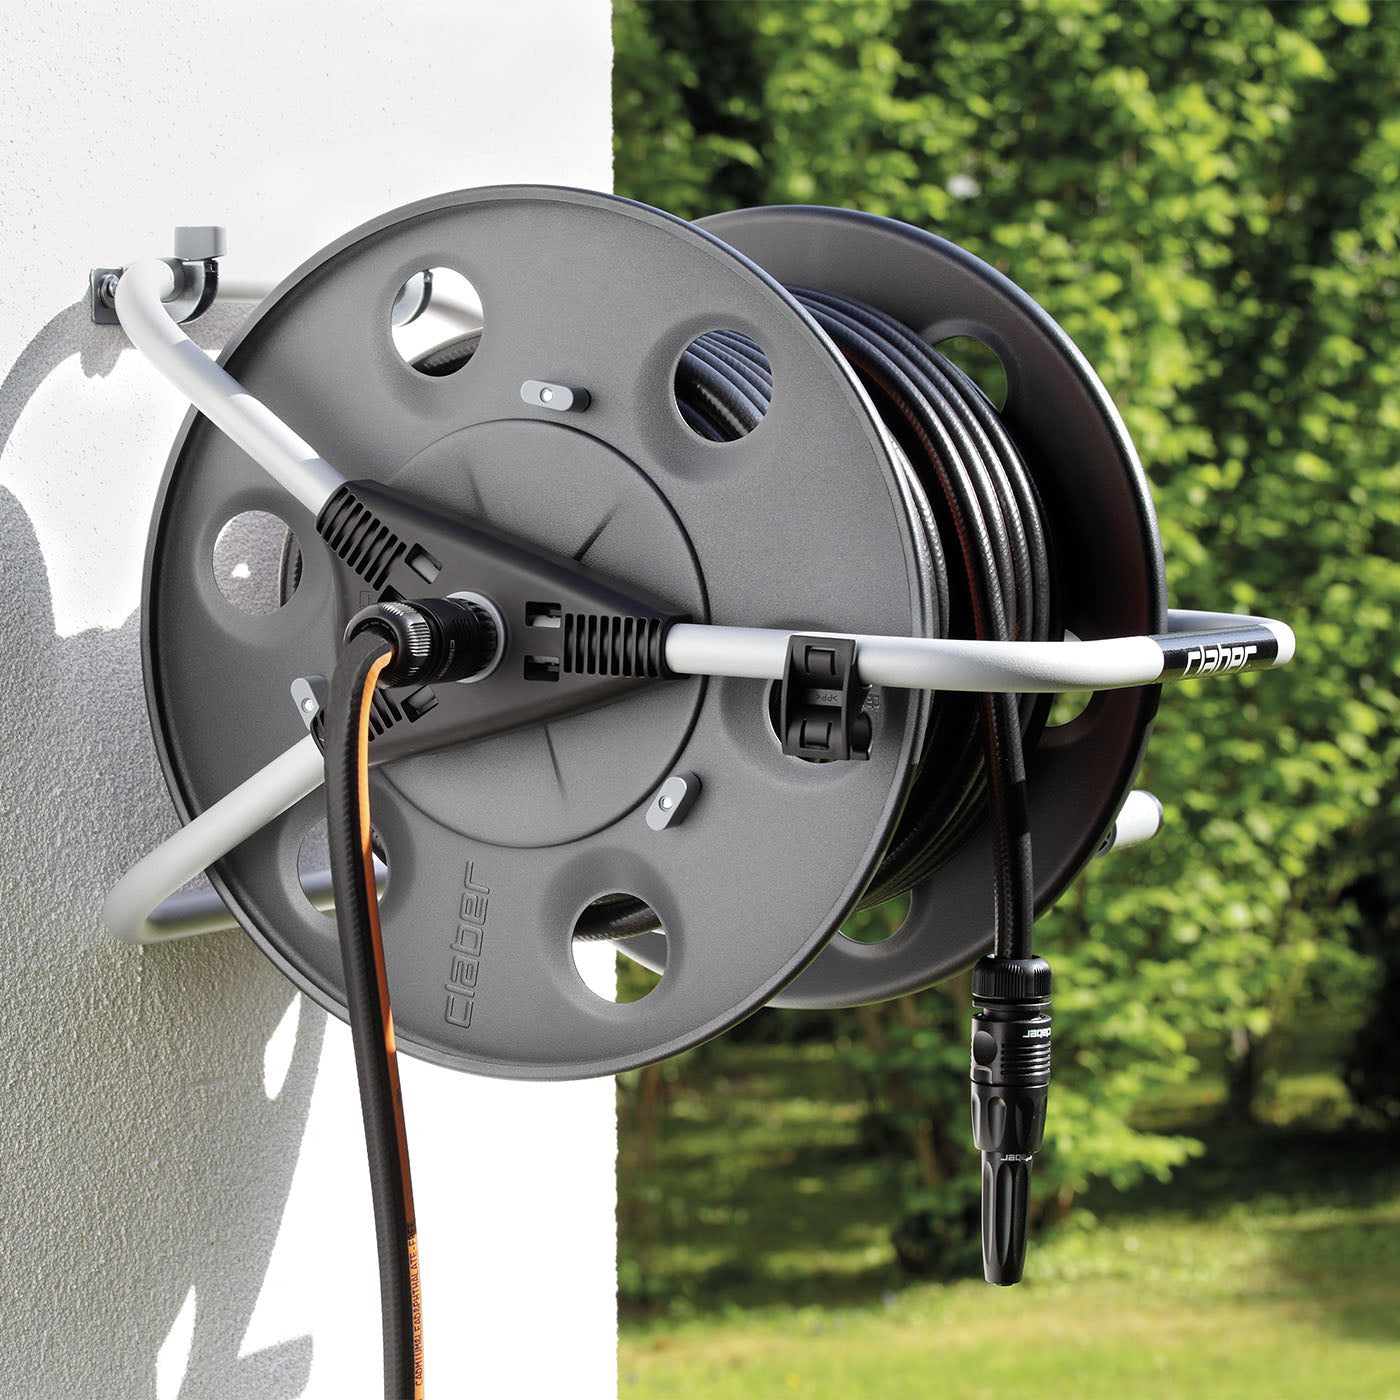 Maximizing Your Garden's Potential with the Best Hose Reels